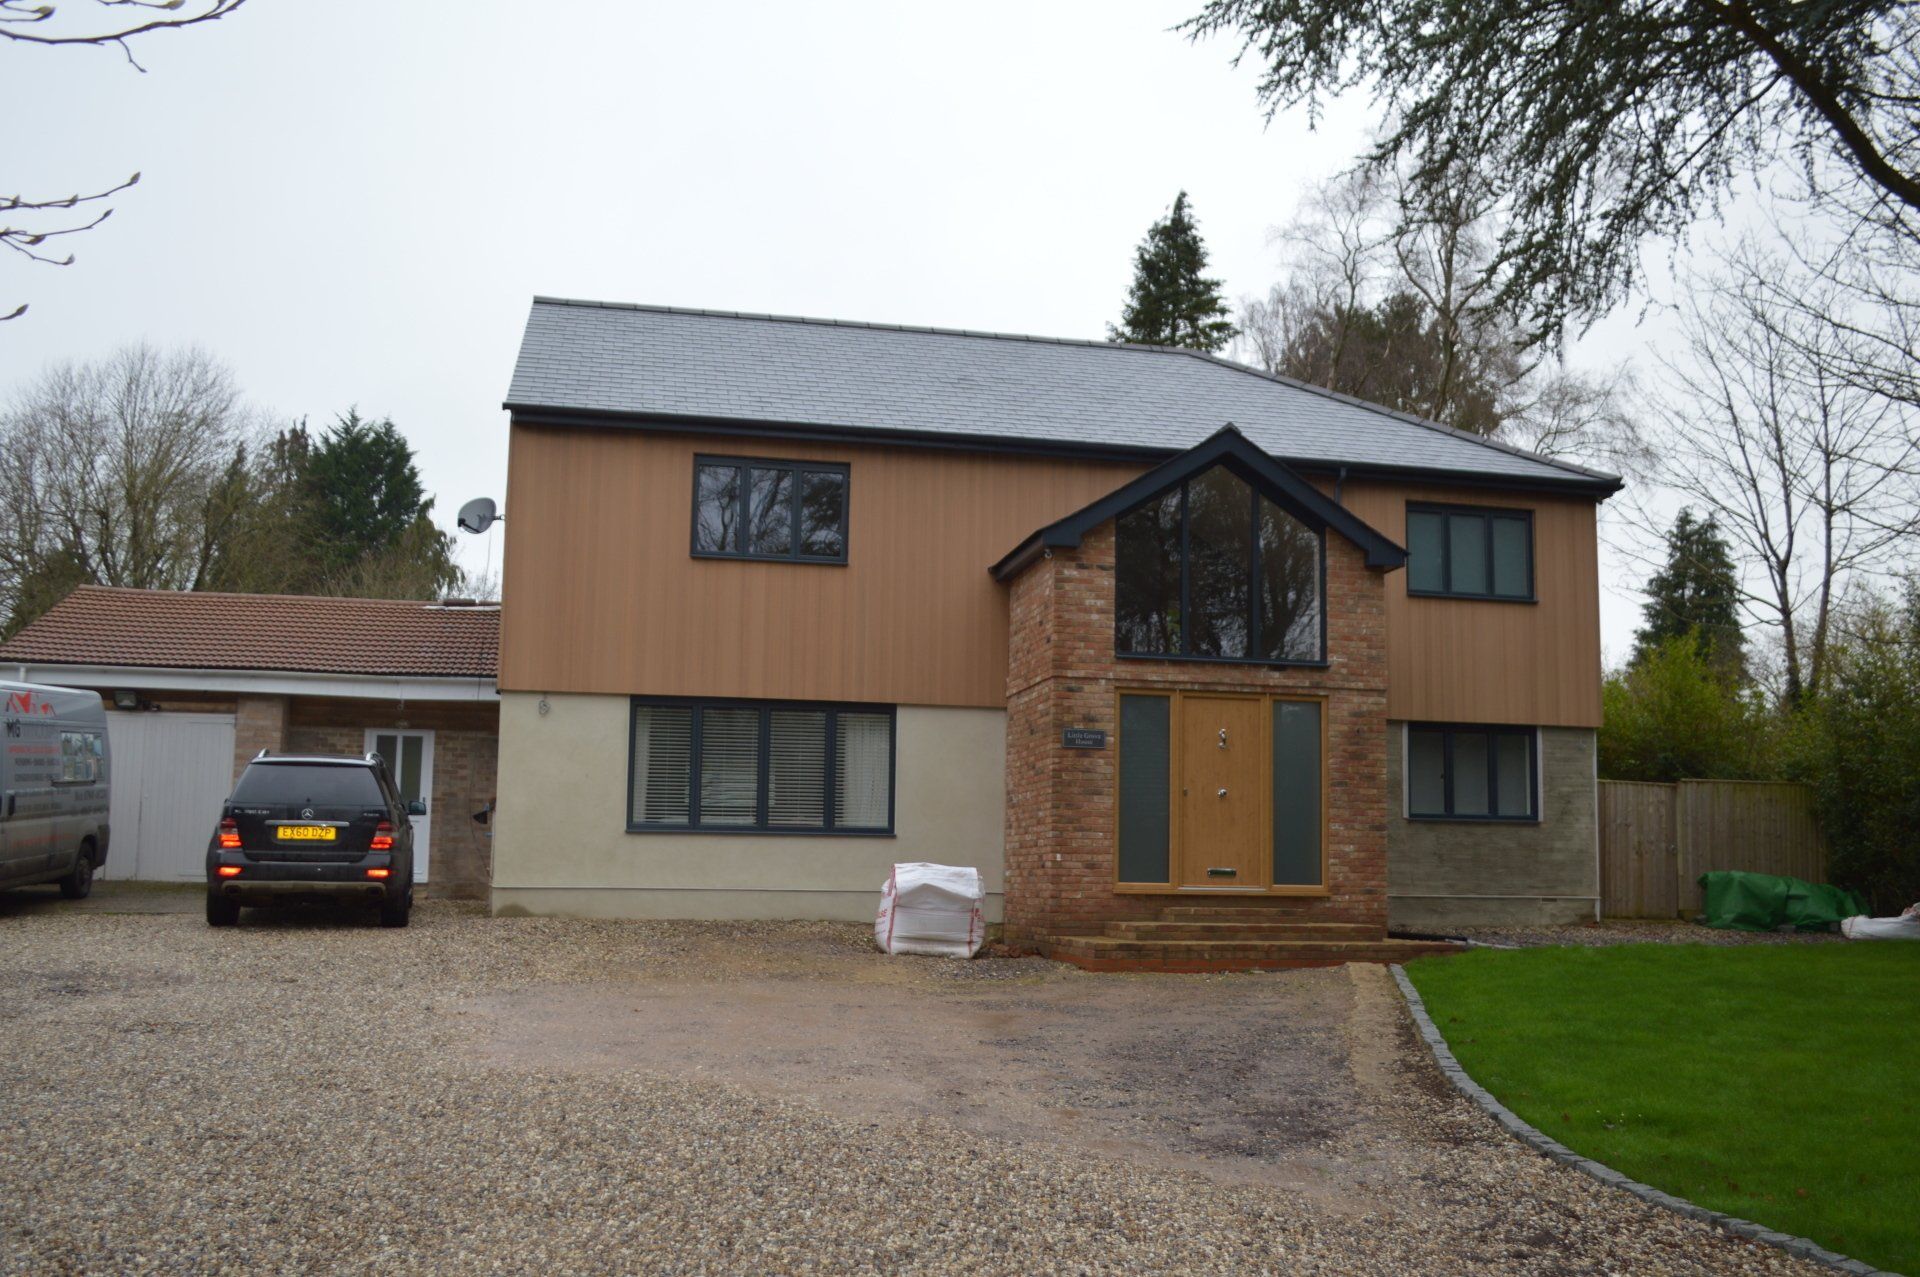 After: The house is a beautiful two storey modern home